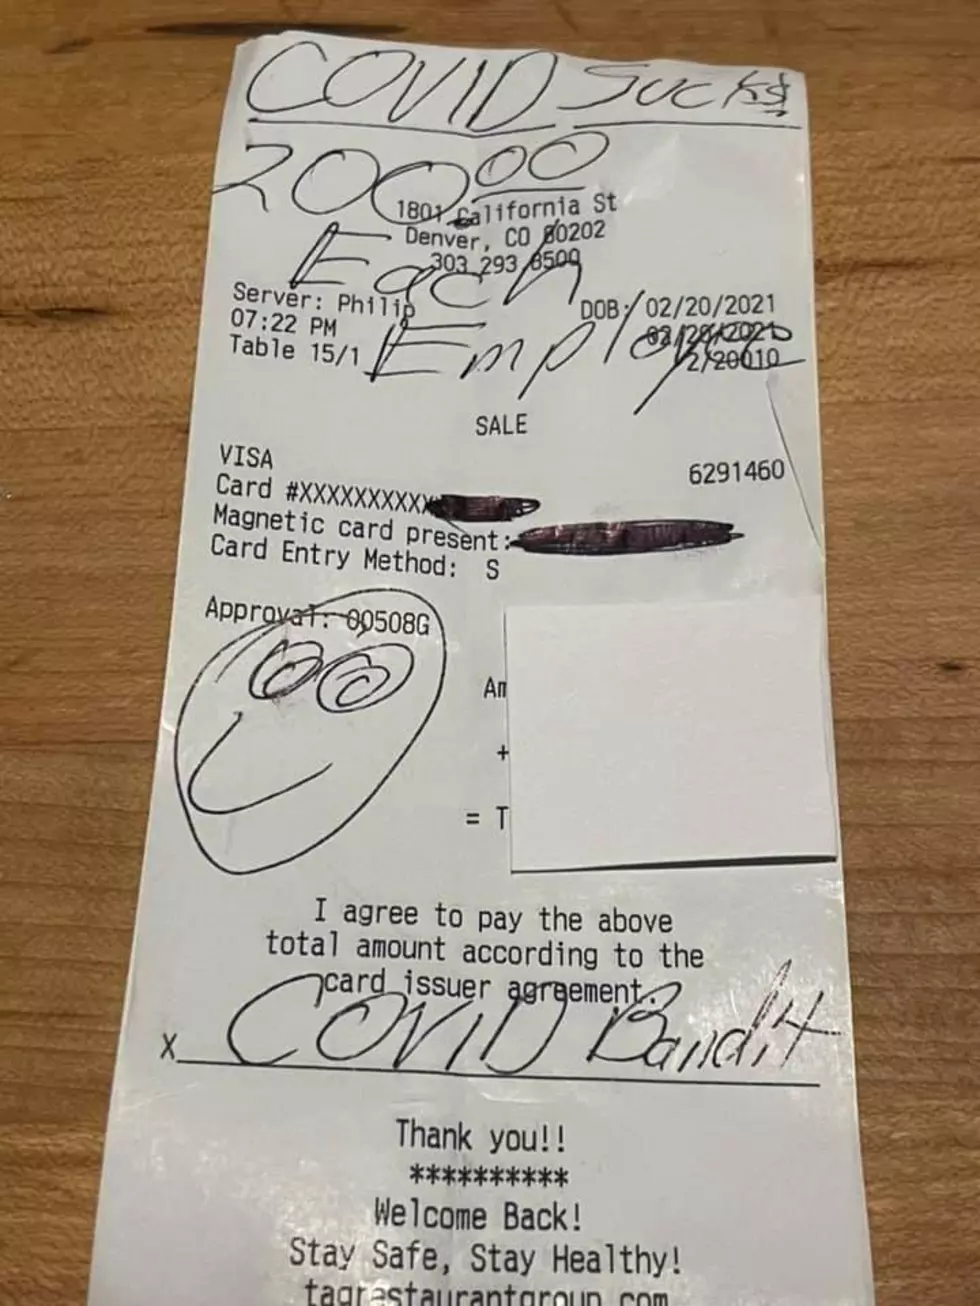 Colorado&#8217;s &#8220;COVID Bandit&#8221; Strikes Again With A $6,800 Tip